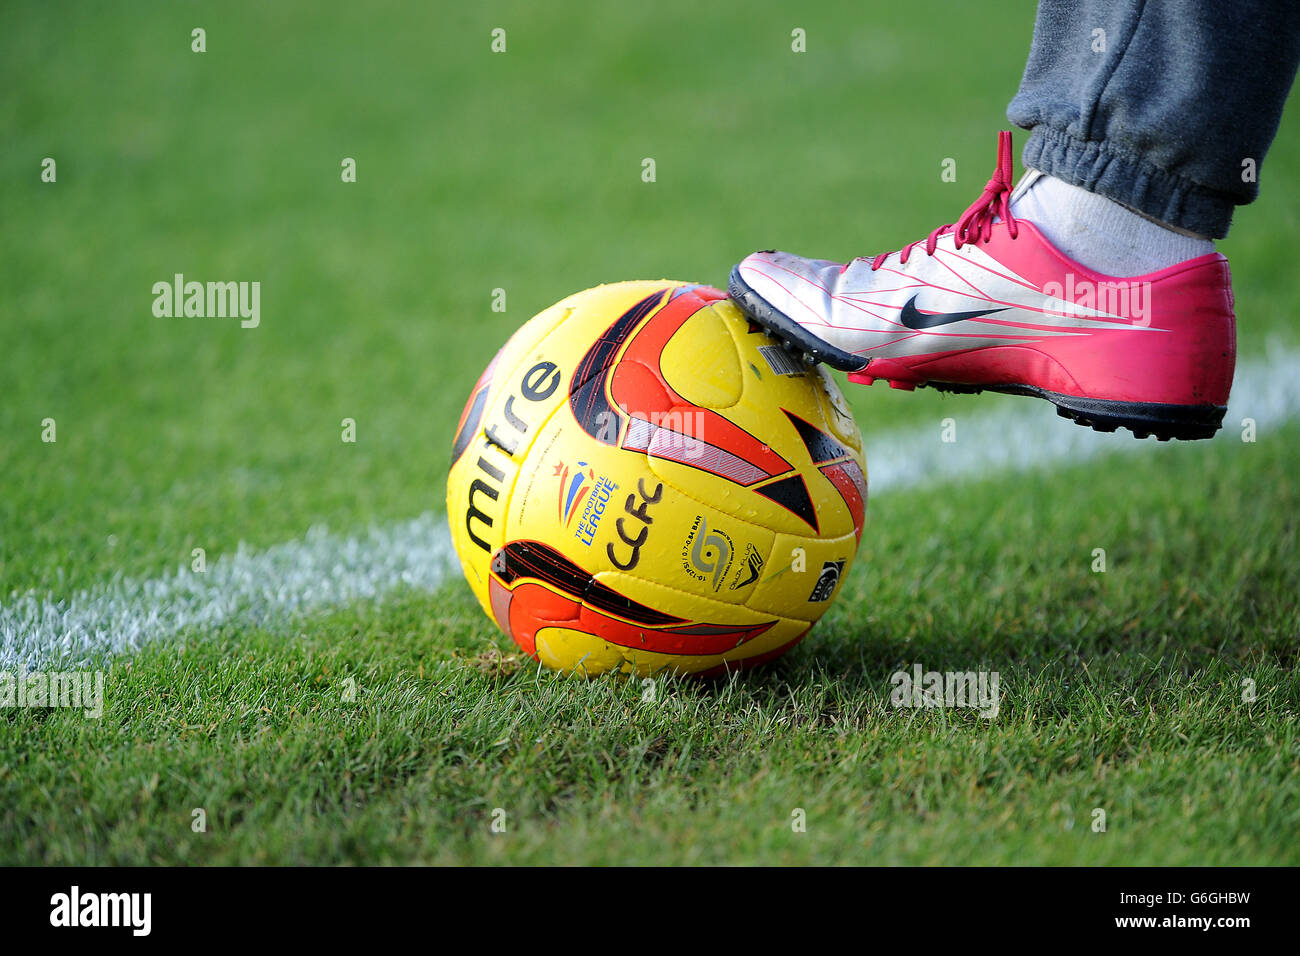 Soccer - Sky Bet League One - Coventry City v Notts County - Sixfields. Detail of the hi-visibility official Football League match ball, the Delta V12 Fluo Stock Photo